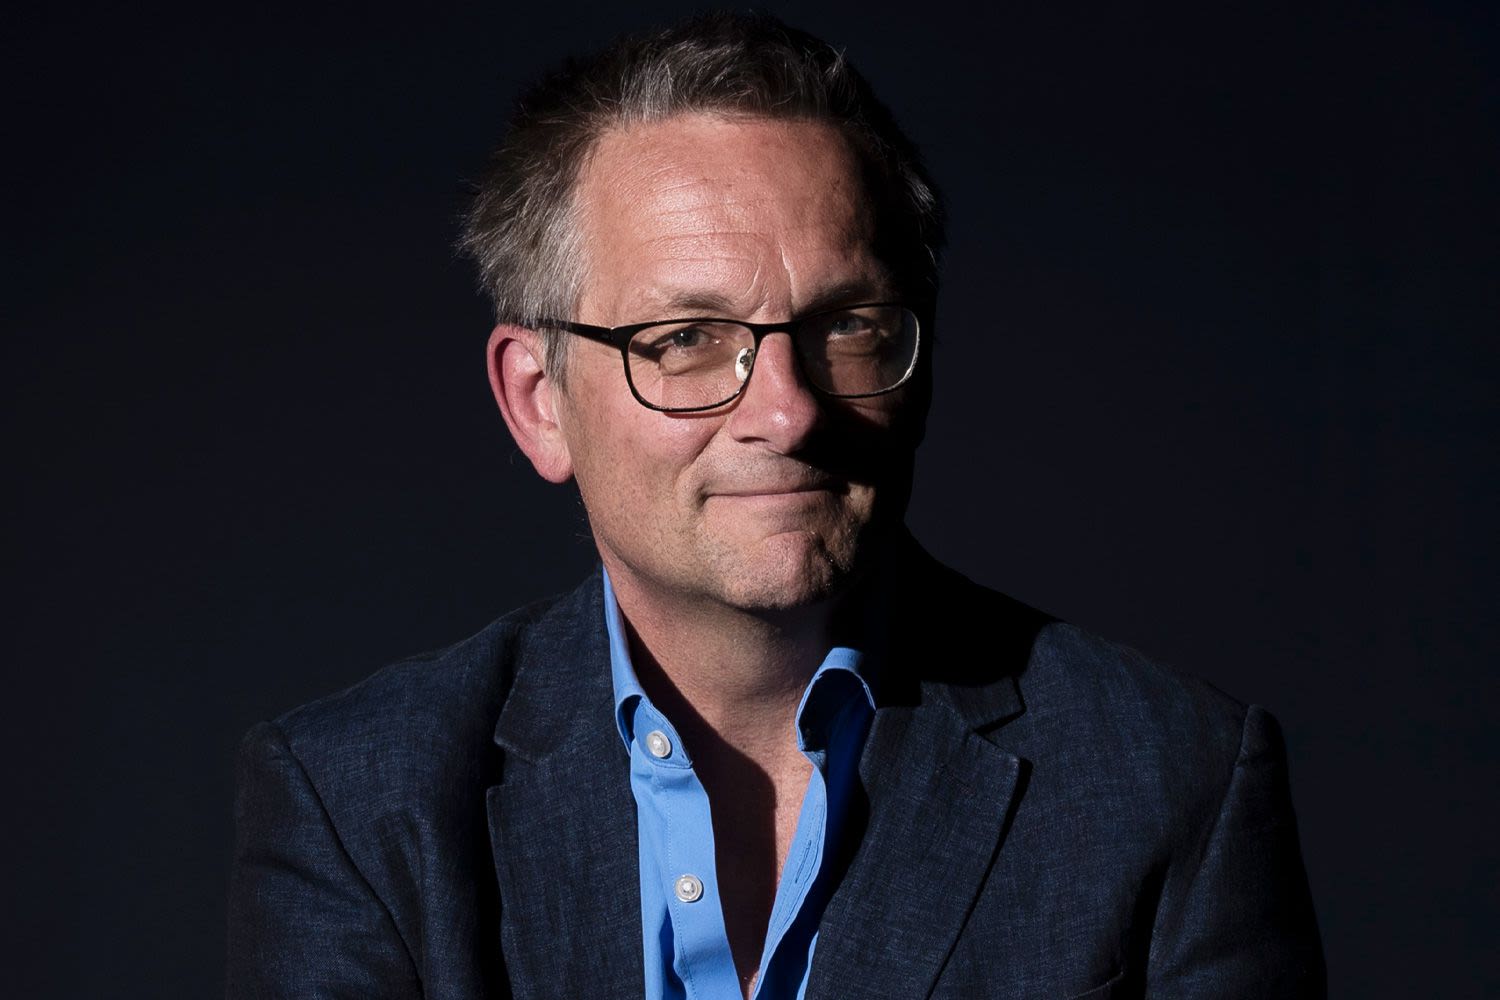 TV Doctor Michael Mosley Goes Missing While on a Walk in Greece: 'No Trace of Him'